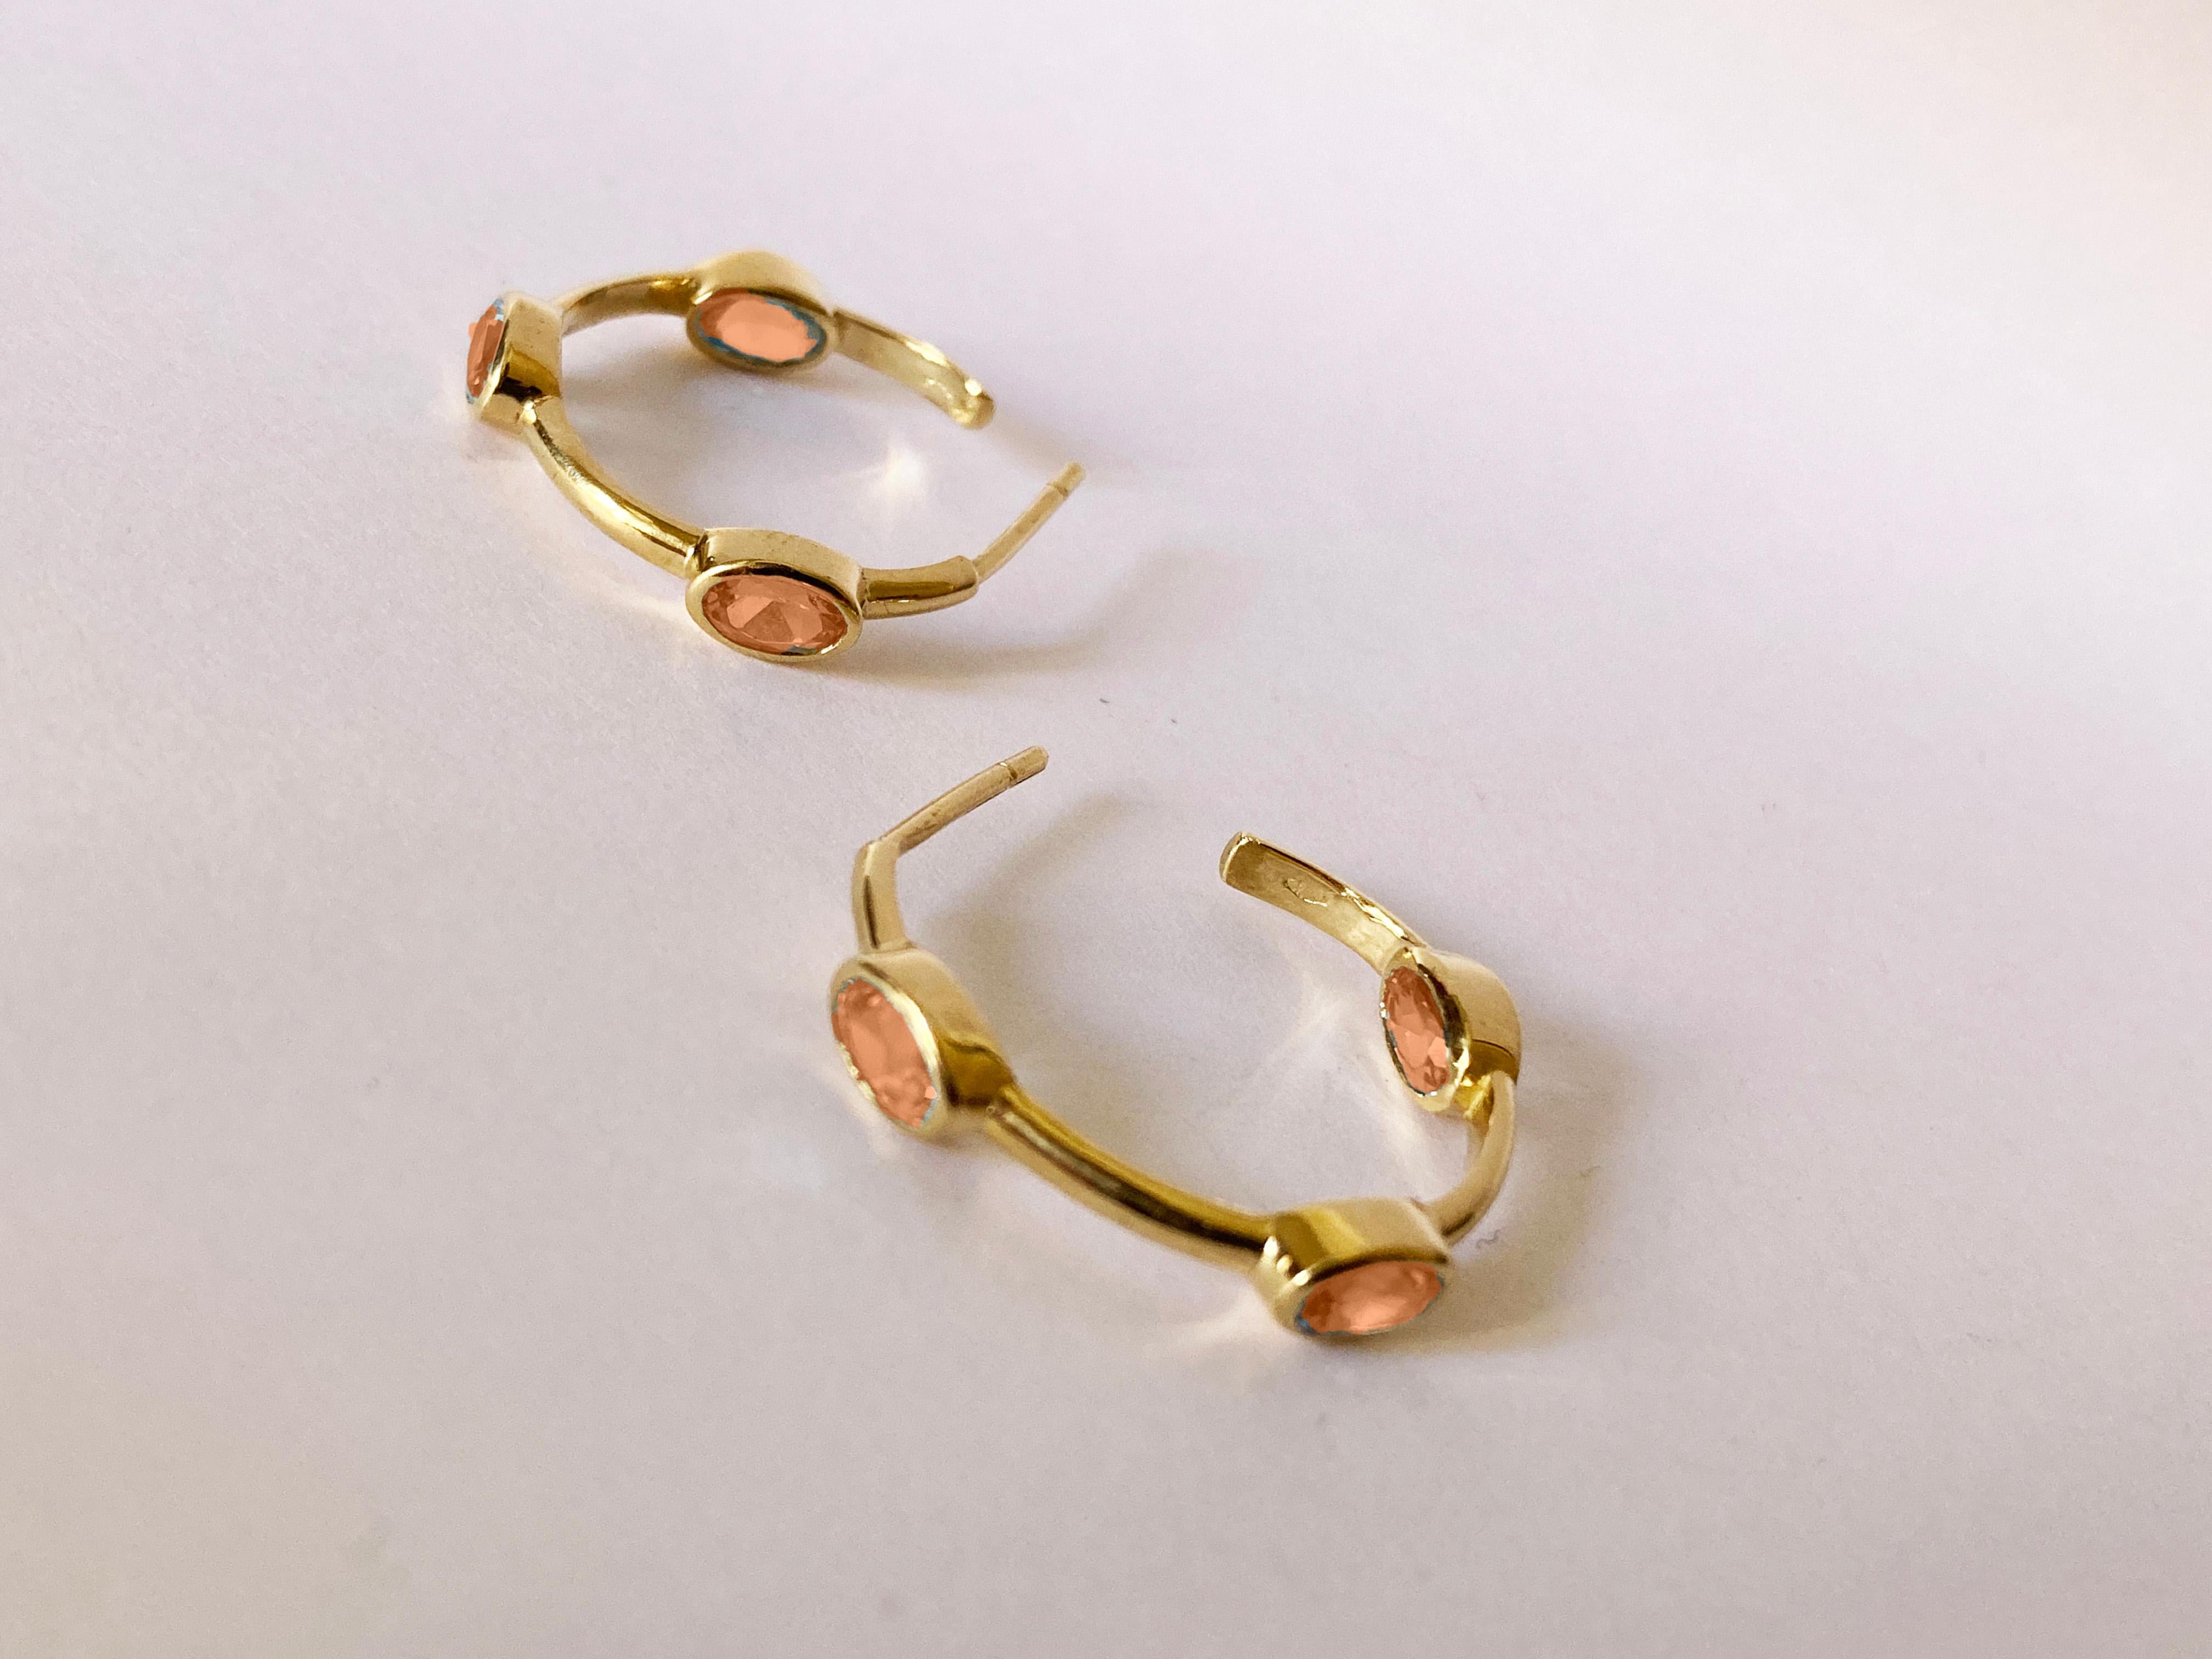 Rossella Ugolini Unisex Citrine Hoop Earrings 18K Yellow Gold Made In Italy For Sale 6